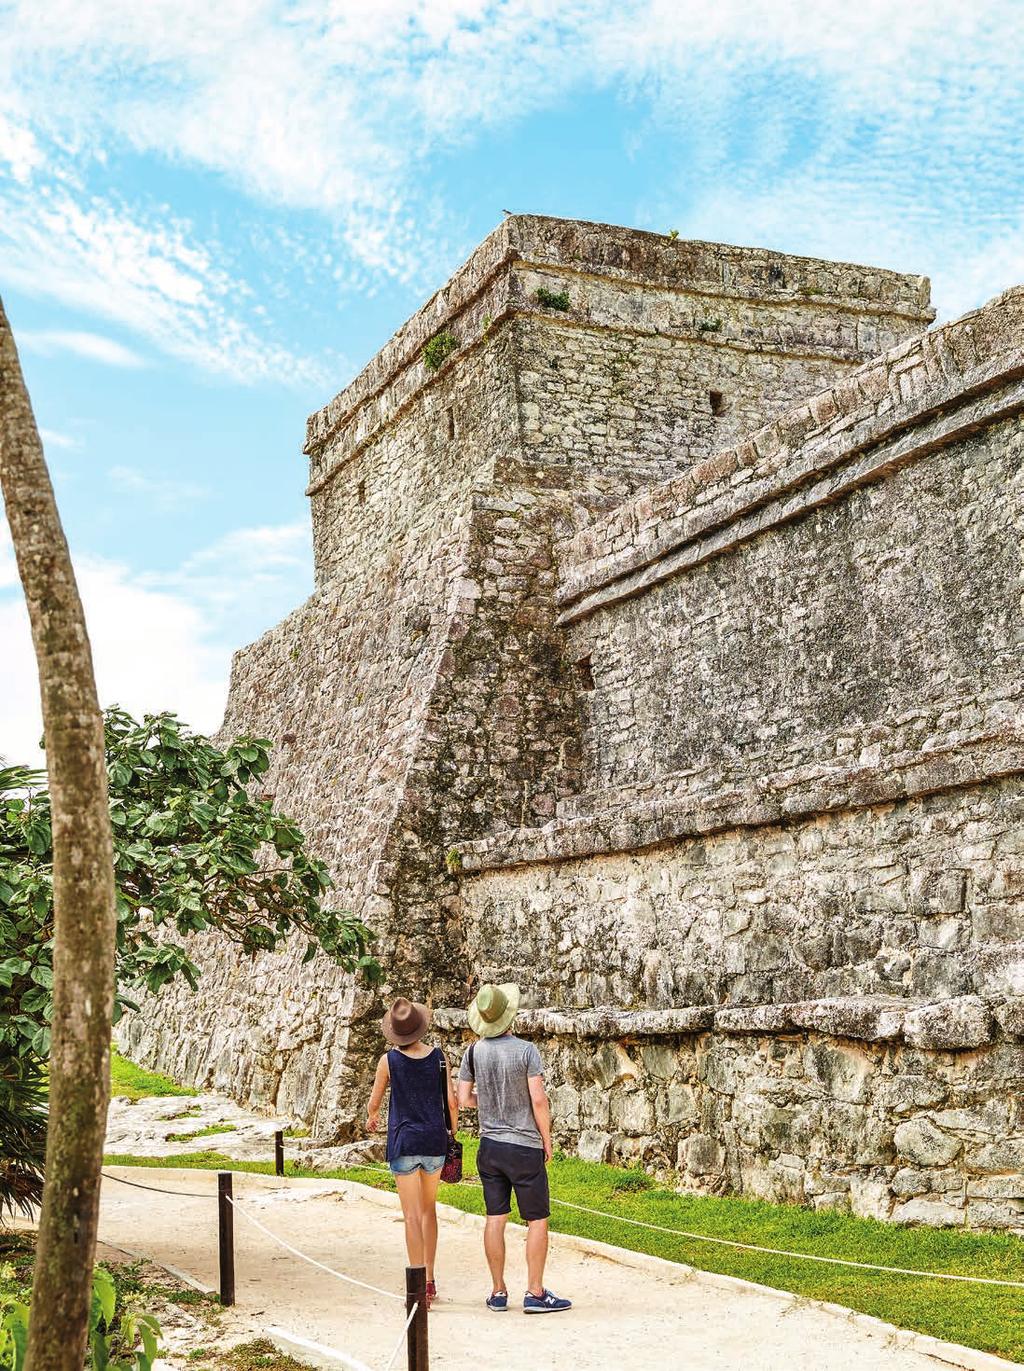 Step into the shadows of this once great civilization and unveil intriguing discoveries in gems like Belize